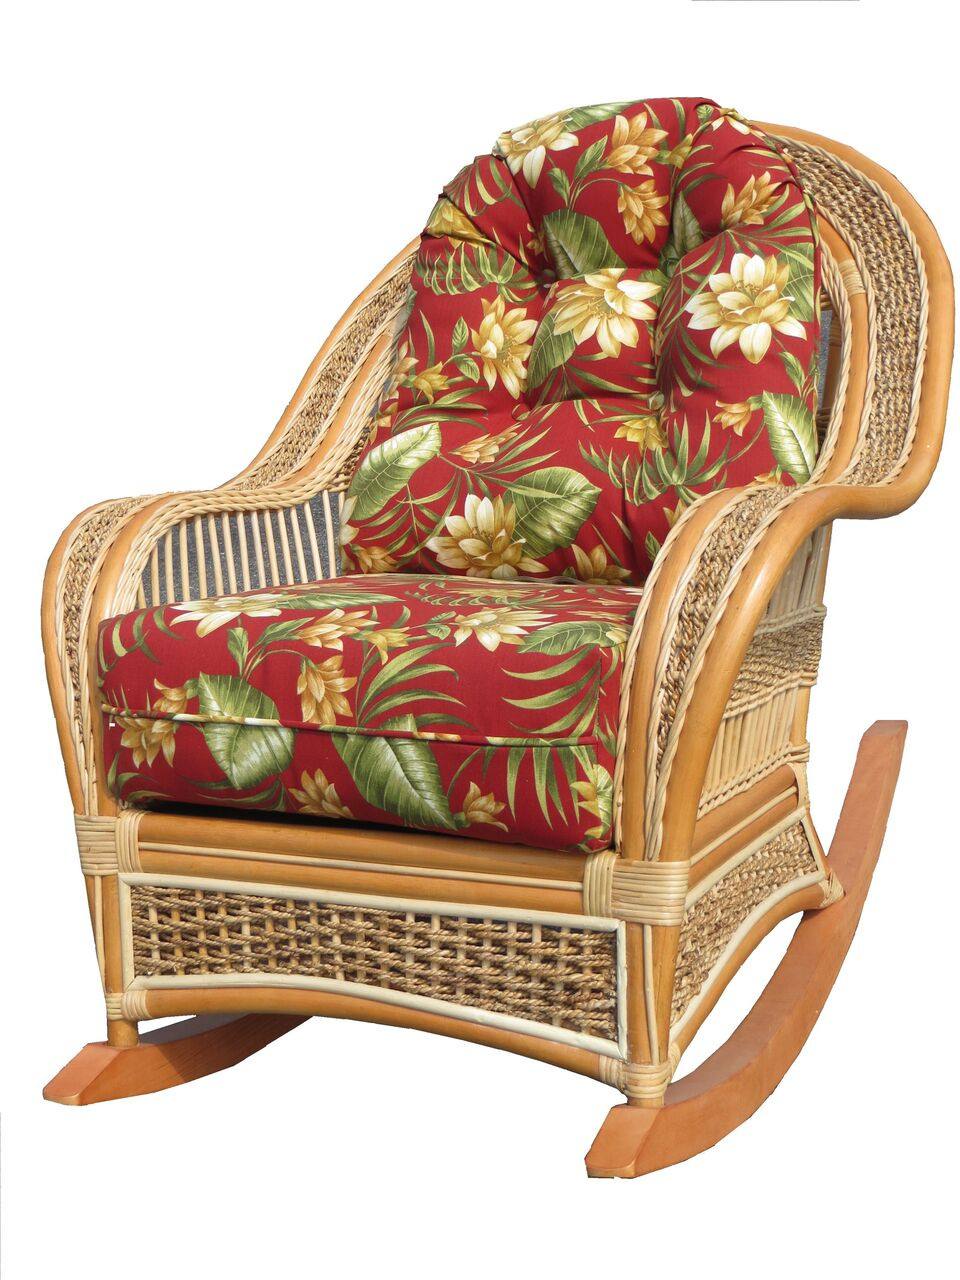 Spice Islands Spice Island Rocker Natural Rocking Chair - Rattan Imports